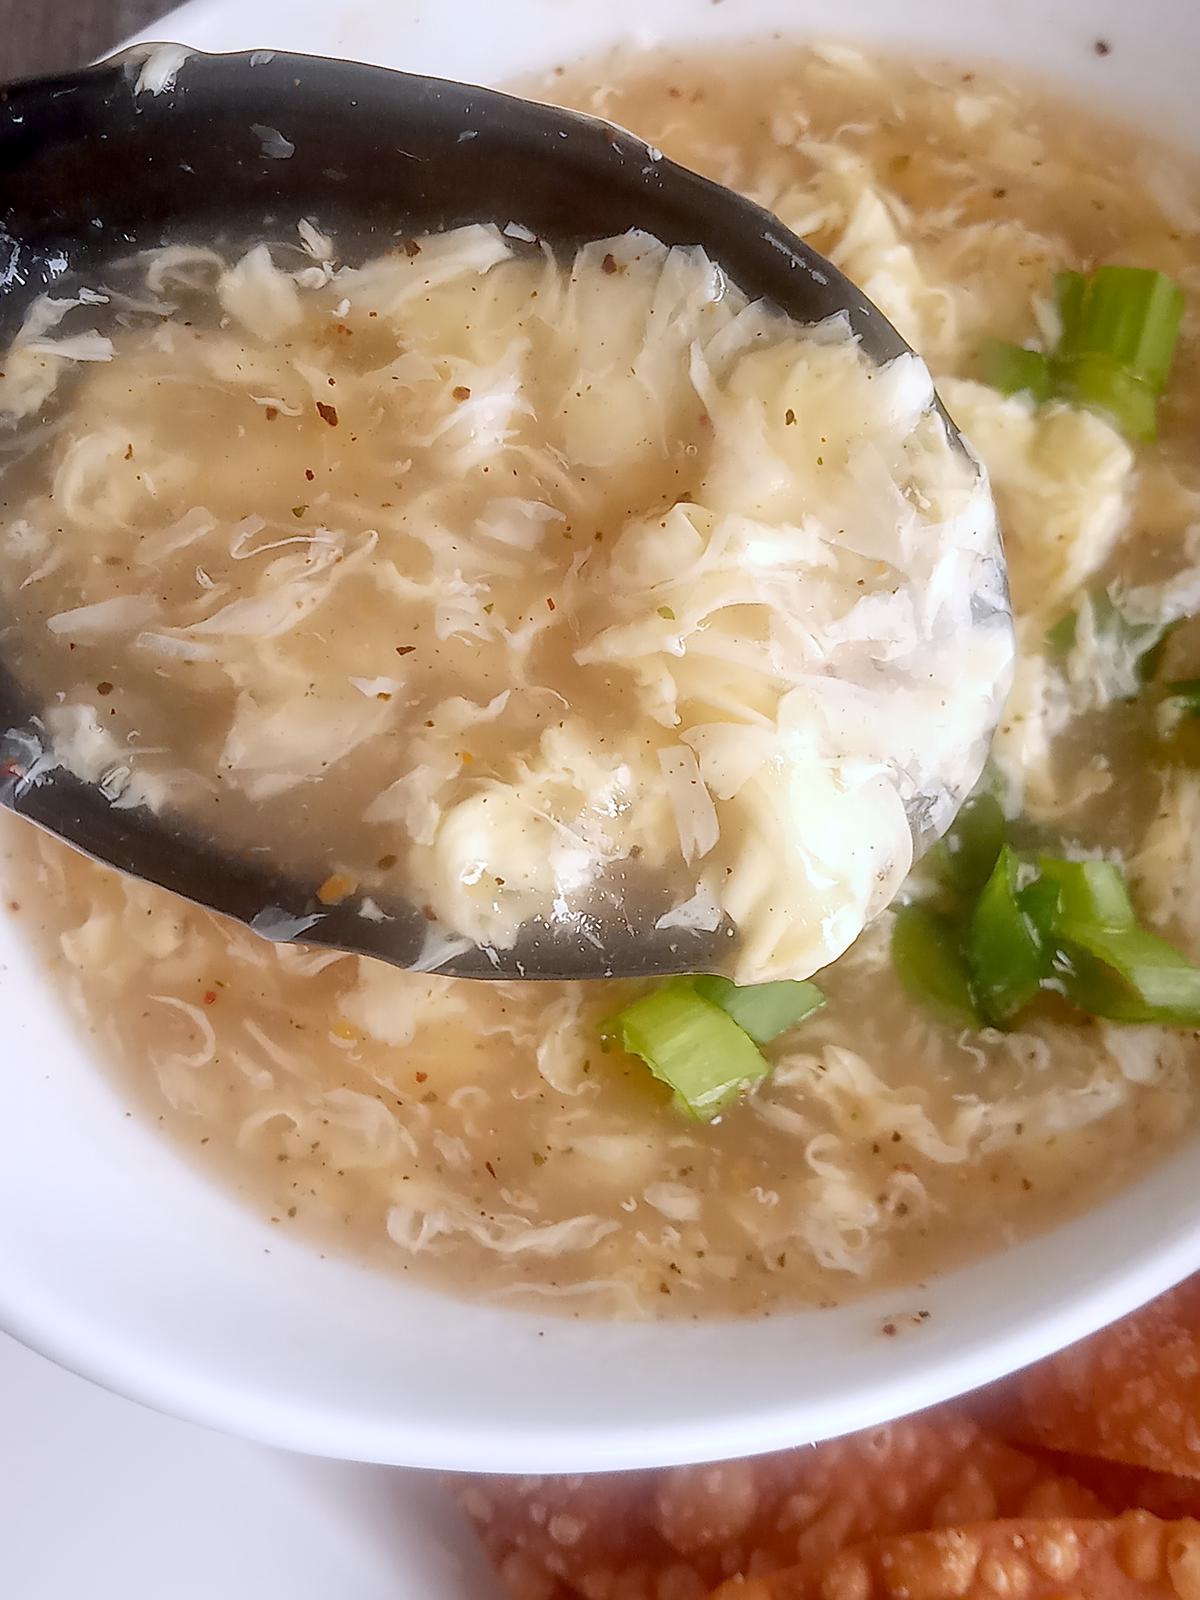 Spoonful of egg drop soup.